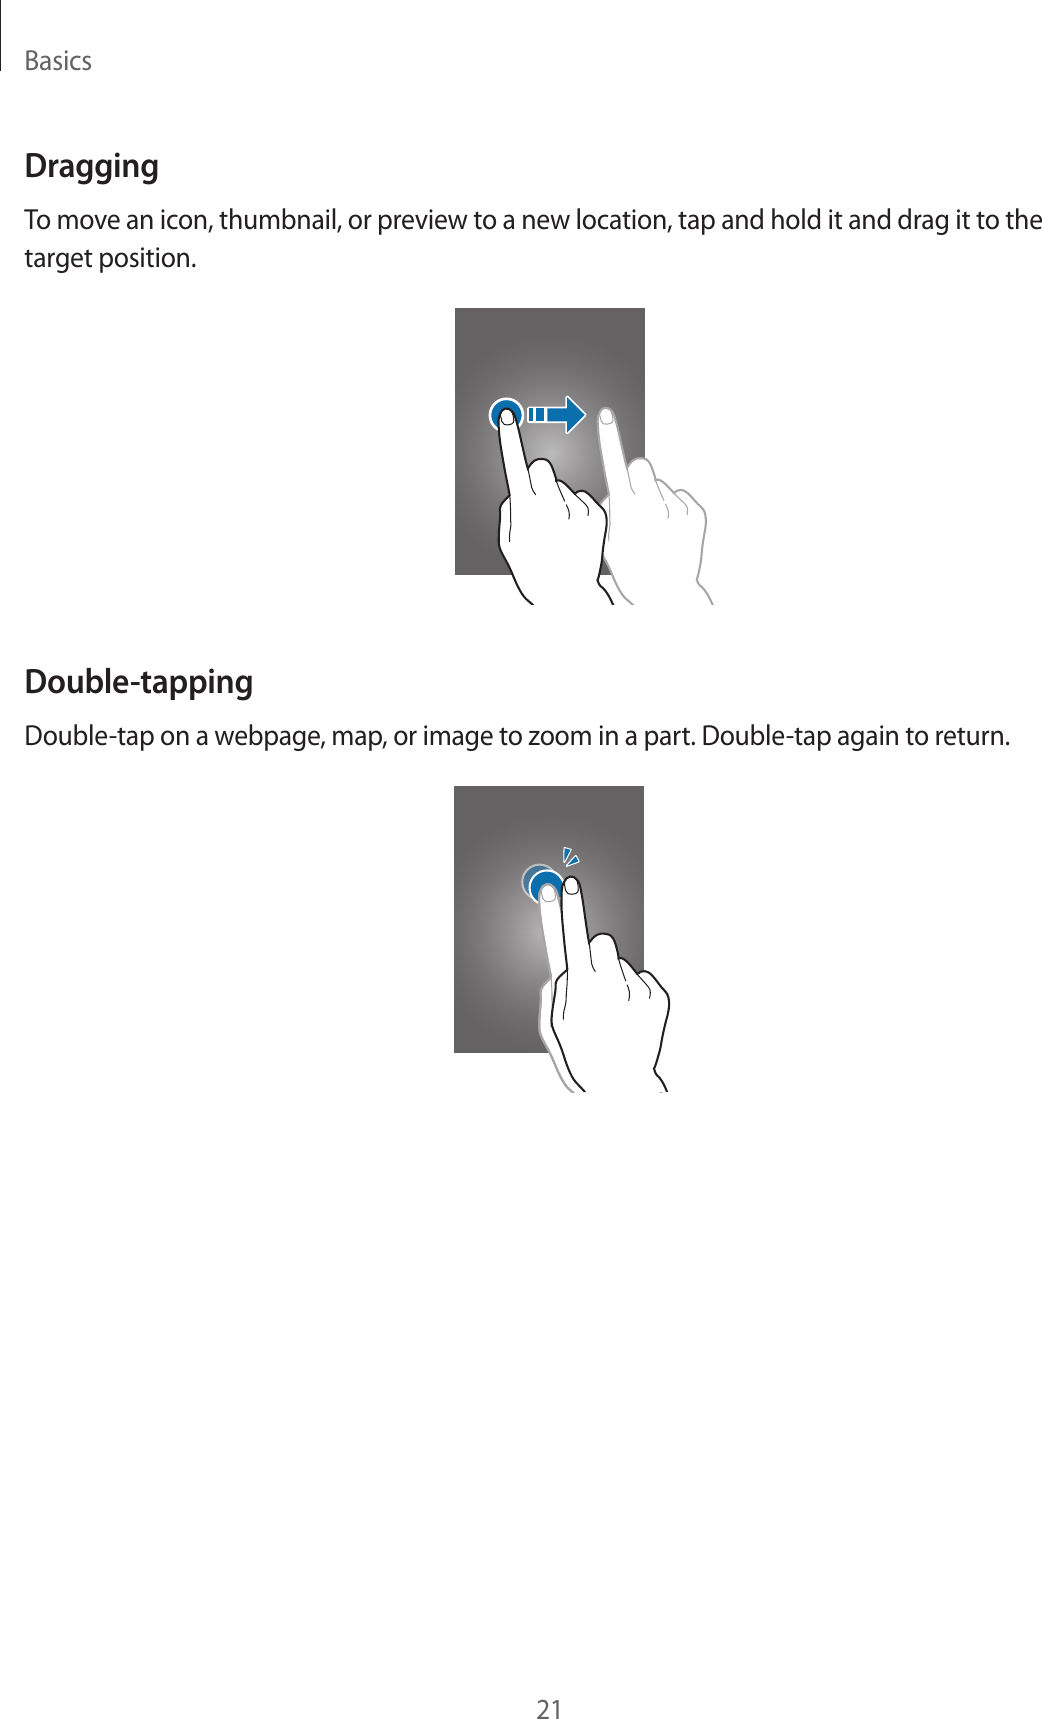 Basics21DraggingTo move an icon, thumbnail, or preview to a new location, tap and hold it and drag it to the target position.Double-tappingDouble-tap on a webpage, map, or image to zoom in a part. Double-tap again to return.